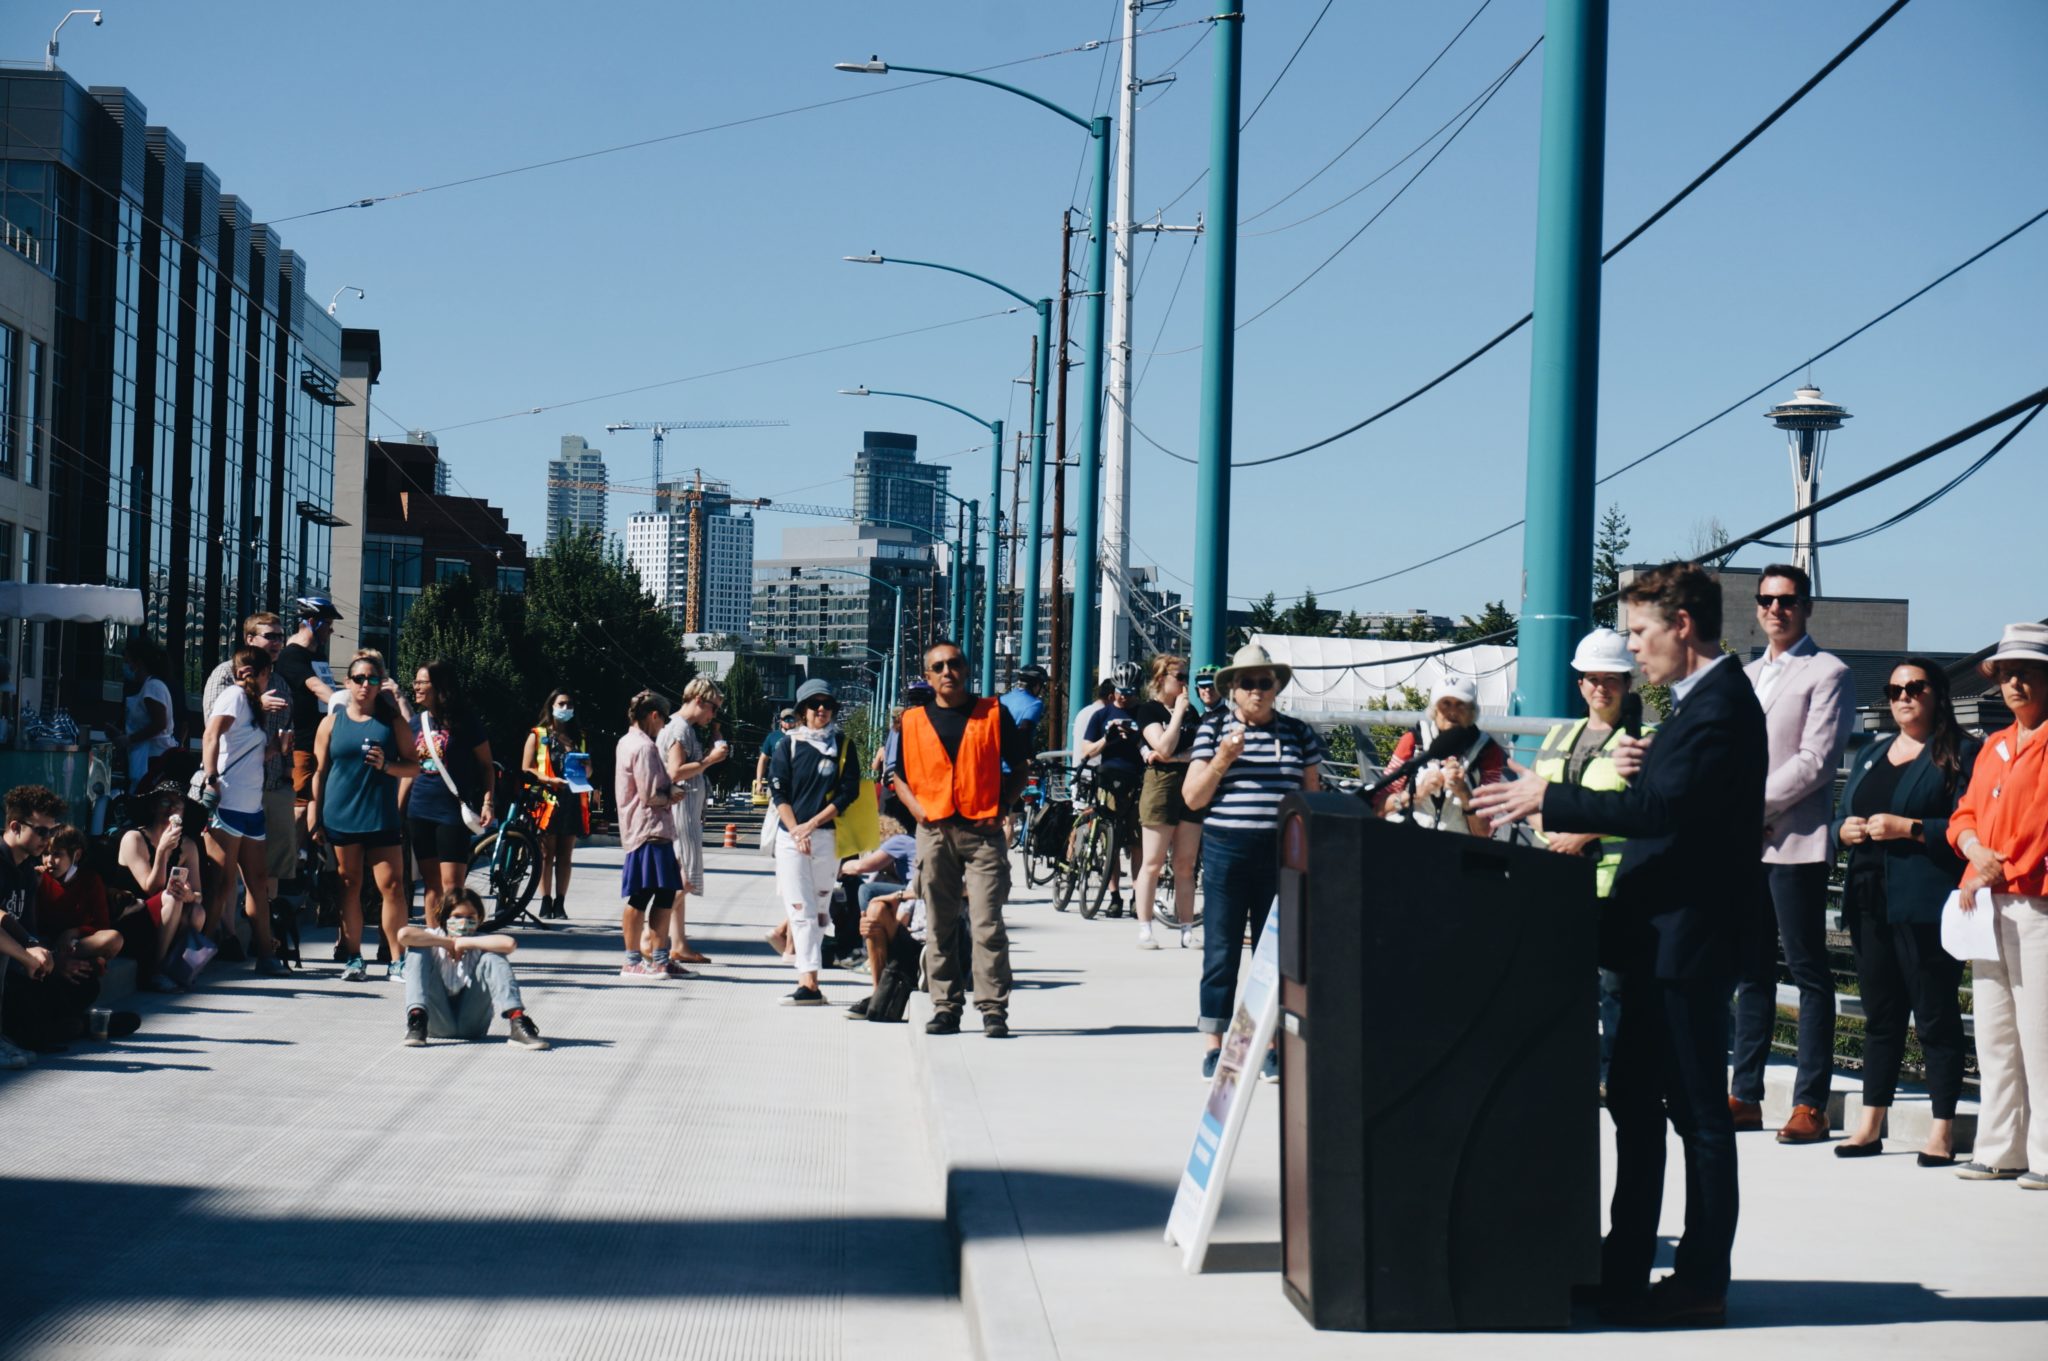 Photo of the grand opening celebration of the new Fairview Ave N bridge in Seattle, in July 2021. Seattle City Councilmember Alex Pedersen is visible speaking at a podium, and neighbors listen to the remarks. The Space Needle is visible in the background.